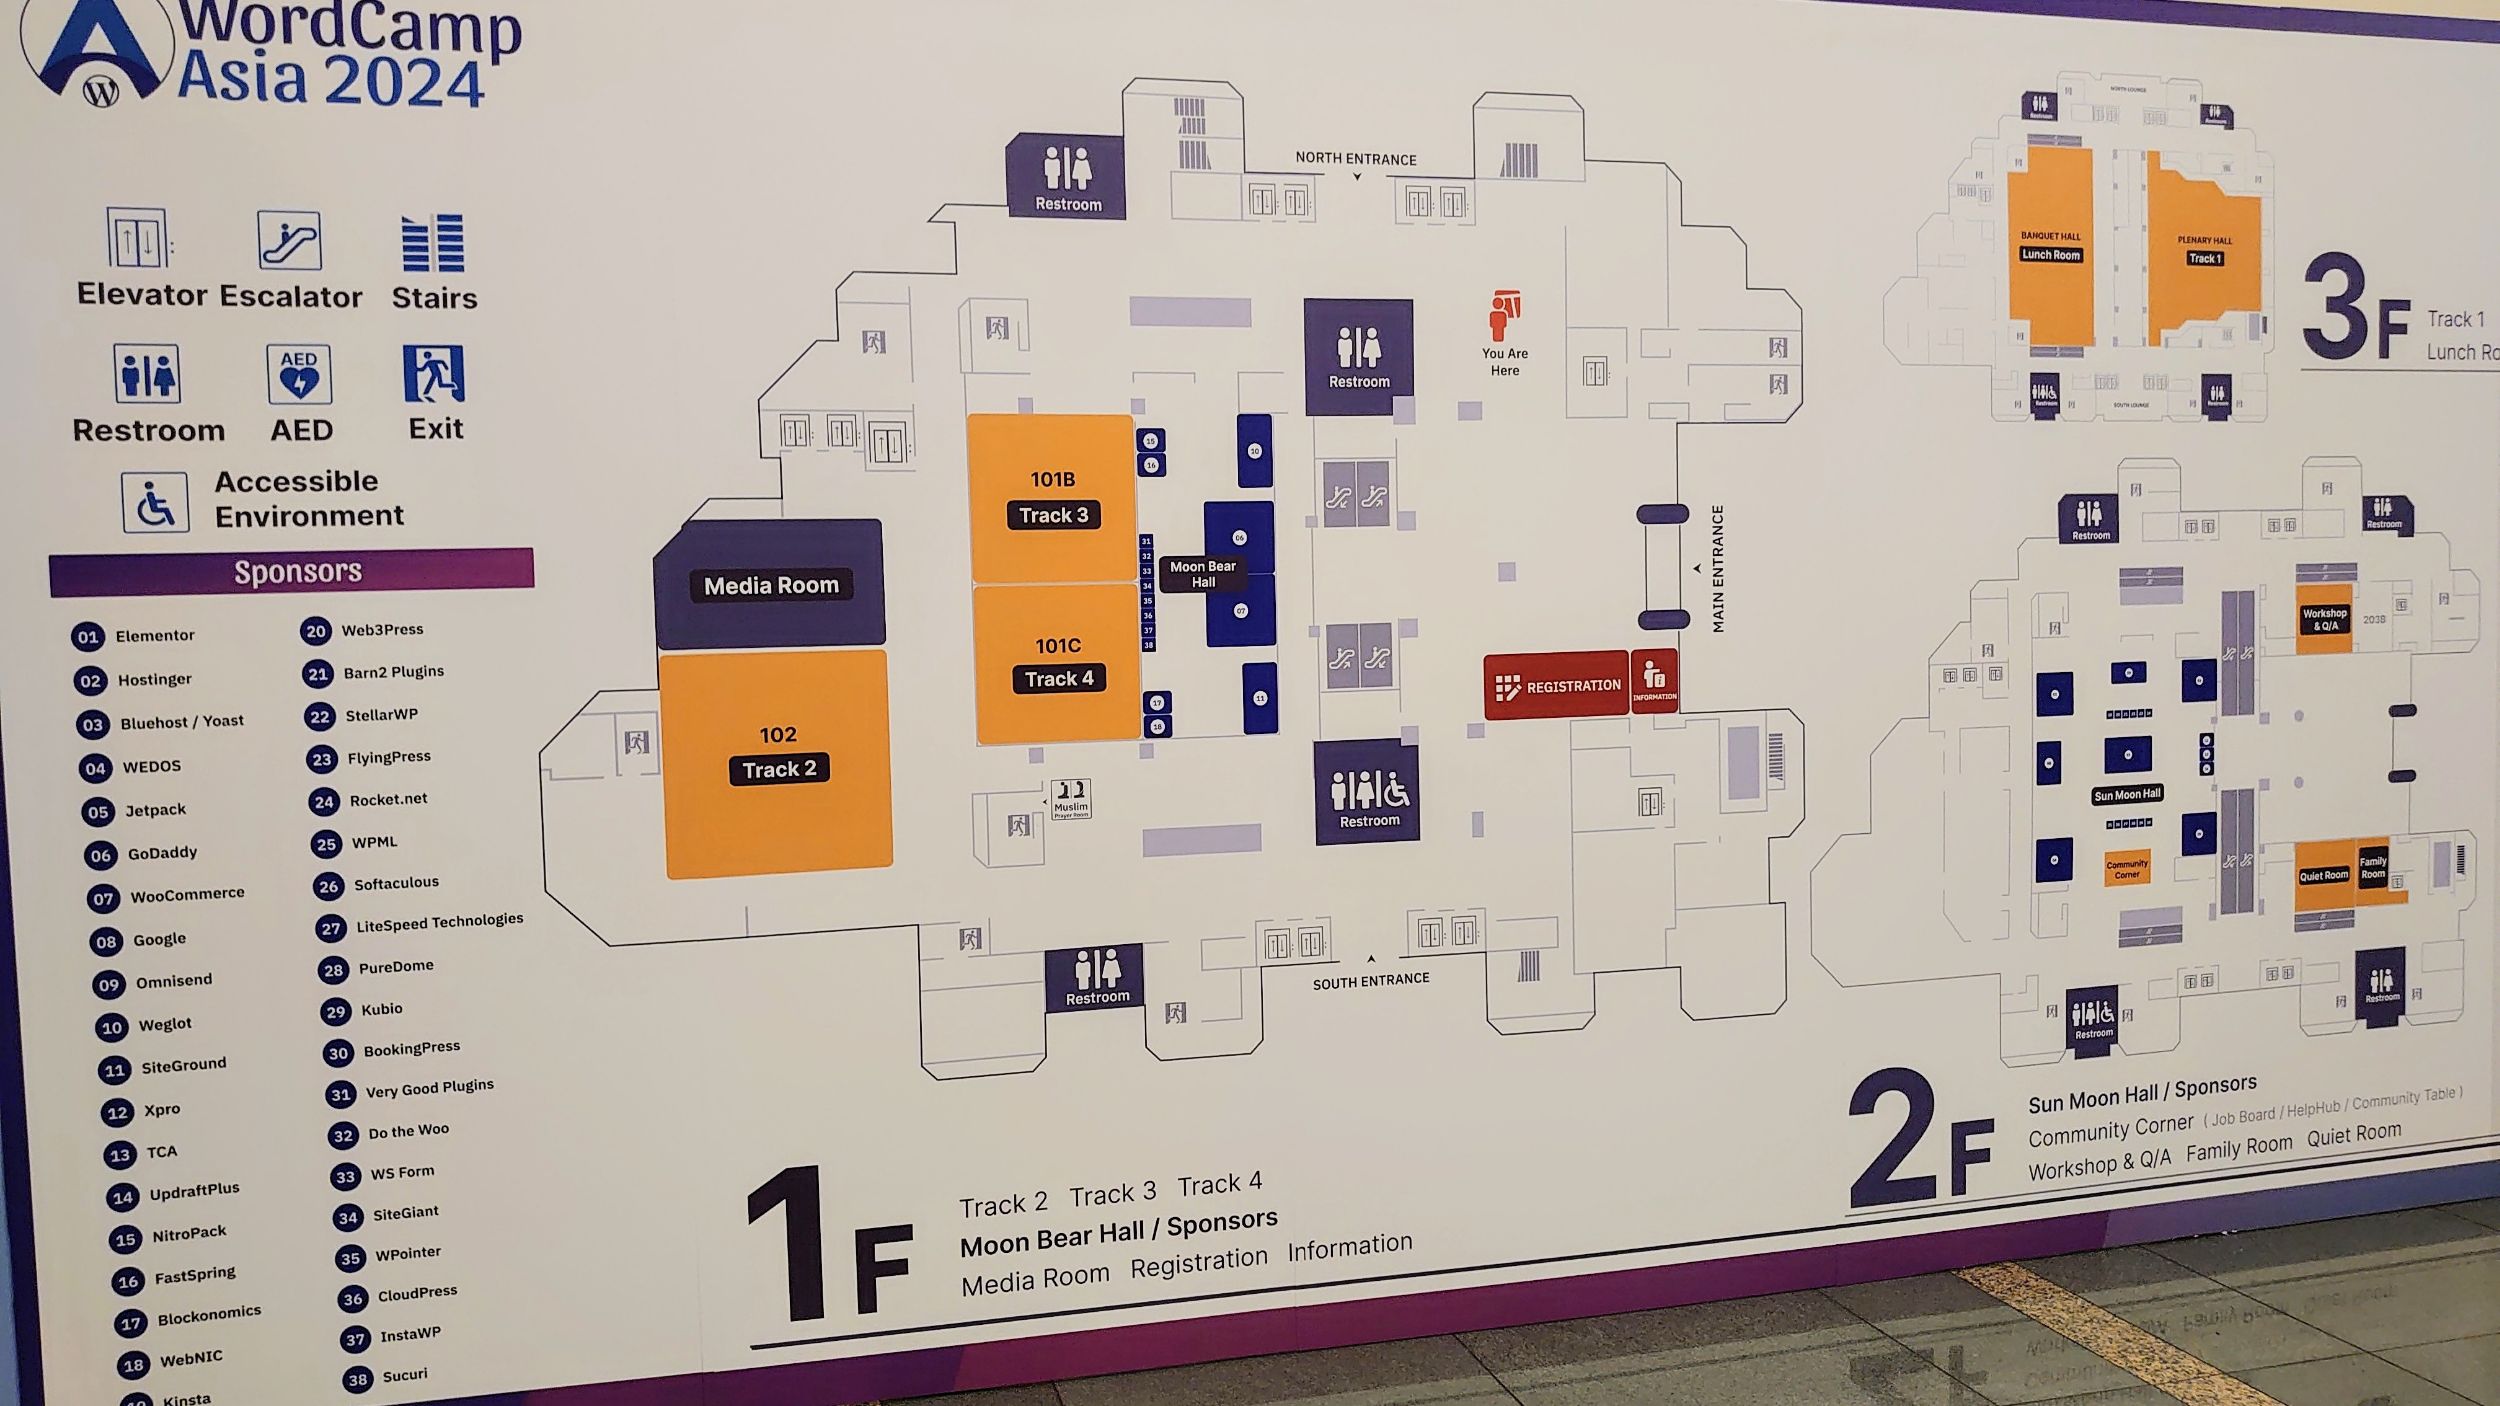 TICC Floor Plans (1F) with the info of sponsor booths – WordCamp Asia 2024